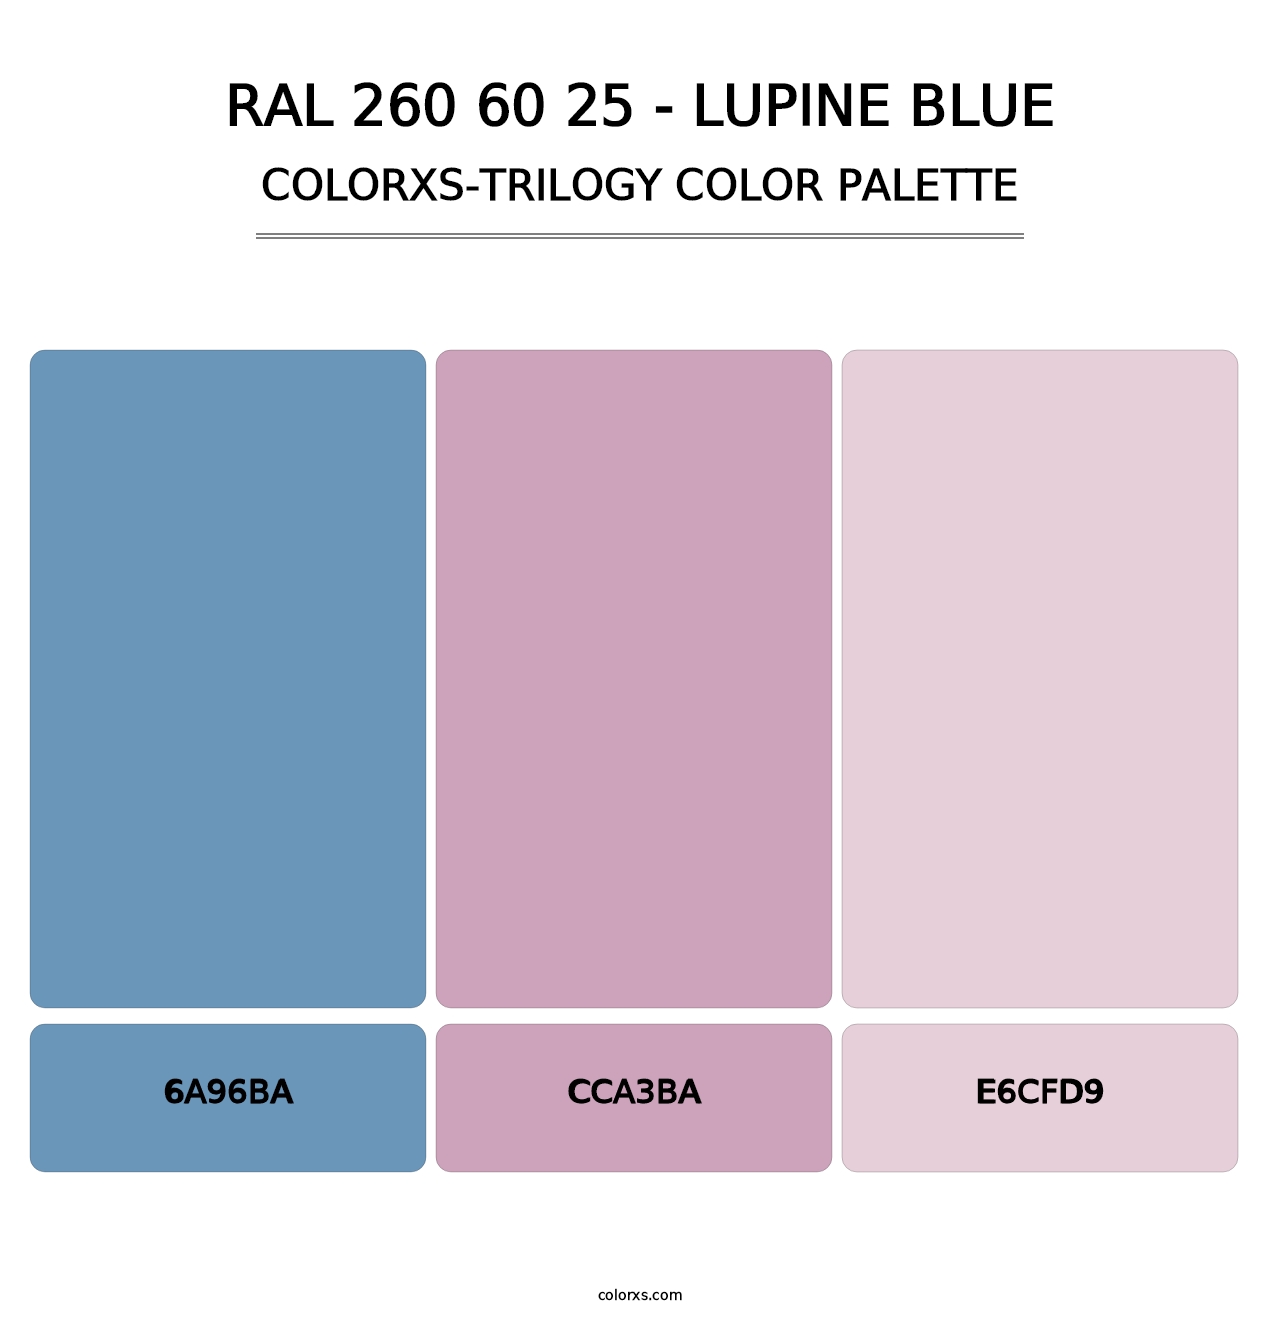 RAL 260 60 25 - Lupine Blue - Colorxs Trilogy Palette